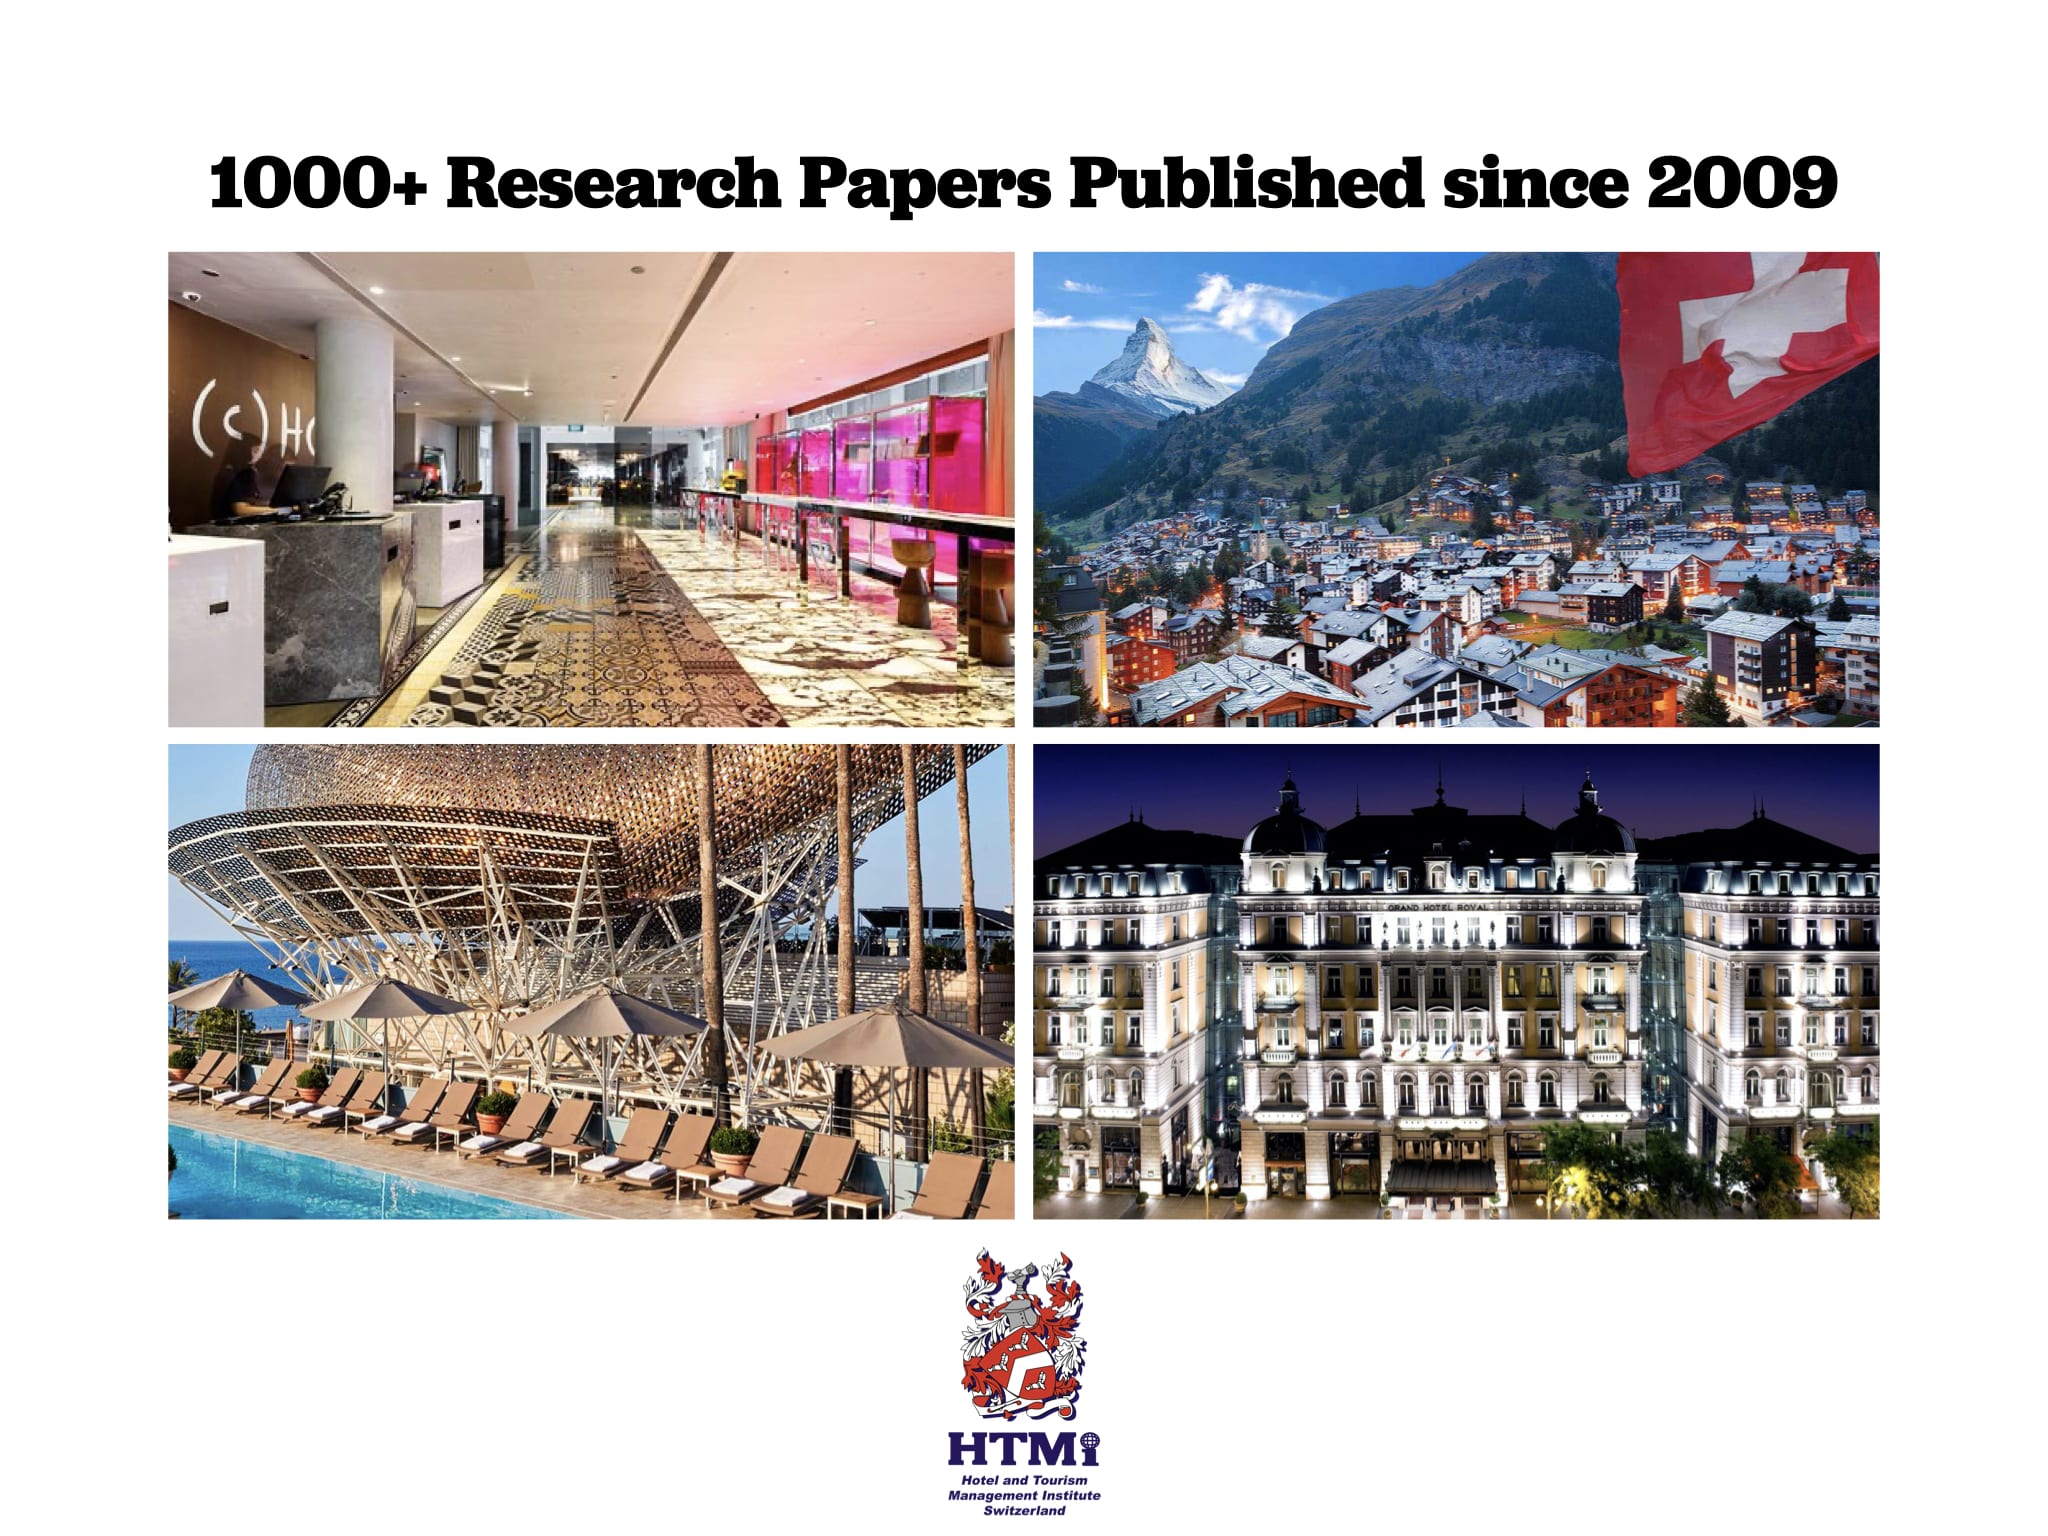 1000+ Research Papers Published since 2009 in our student research journals